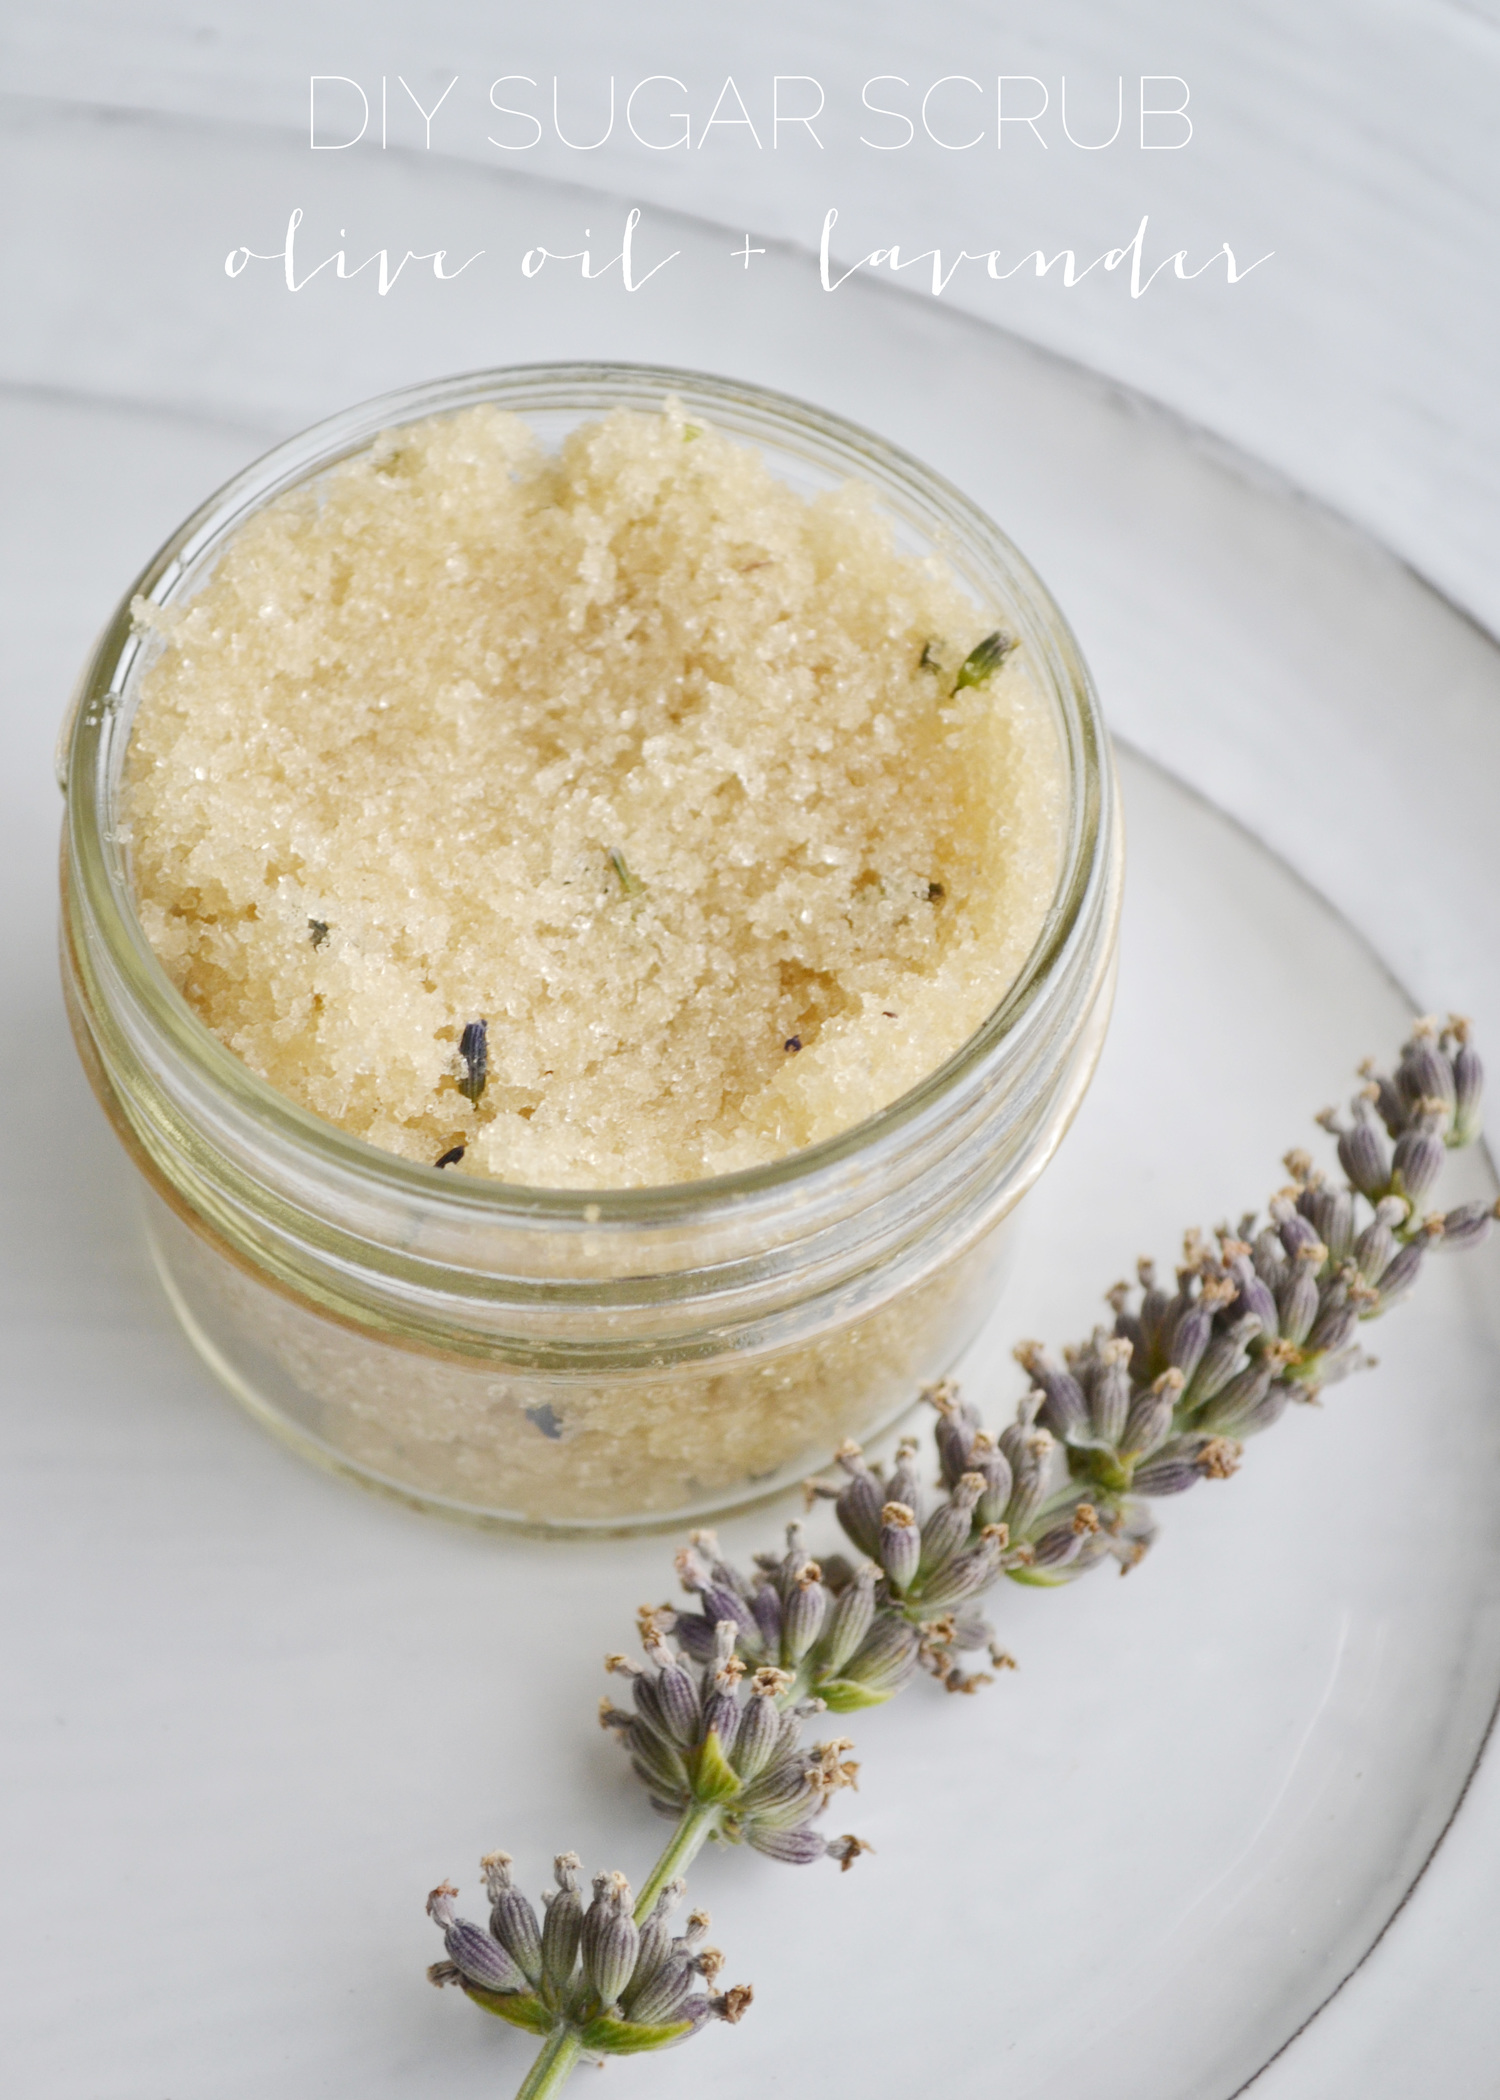 A+very+easy+and+organic+sugar+scrub+recipe+(perfect+to+make+for+a+gift!)+from+boxwoodavenue.com